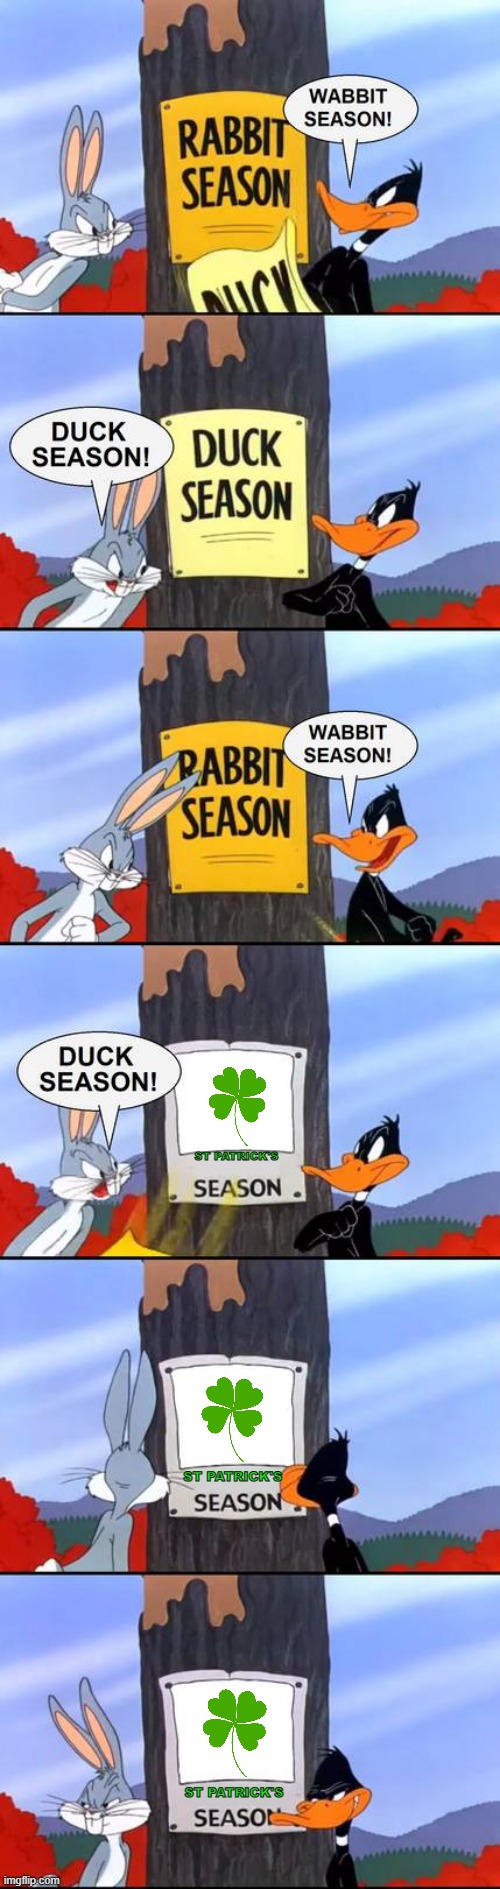 get ready for st patrick's day | ST PATRICK'S; ST PATRICK'S; ST PATRICK'S | image tagged in wabbit season duck season elmer season,st patrick's day,warner bros | made w/ Imgflip meme maker